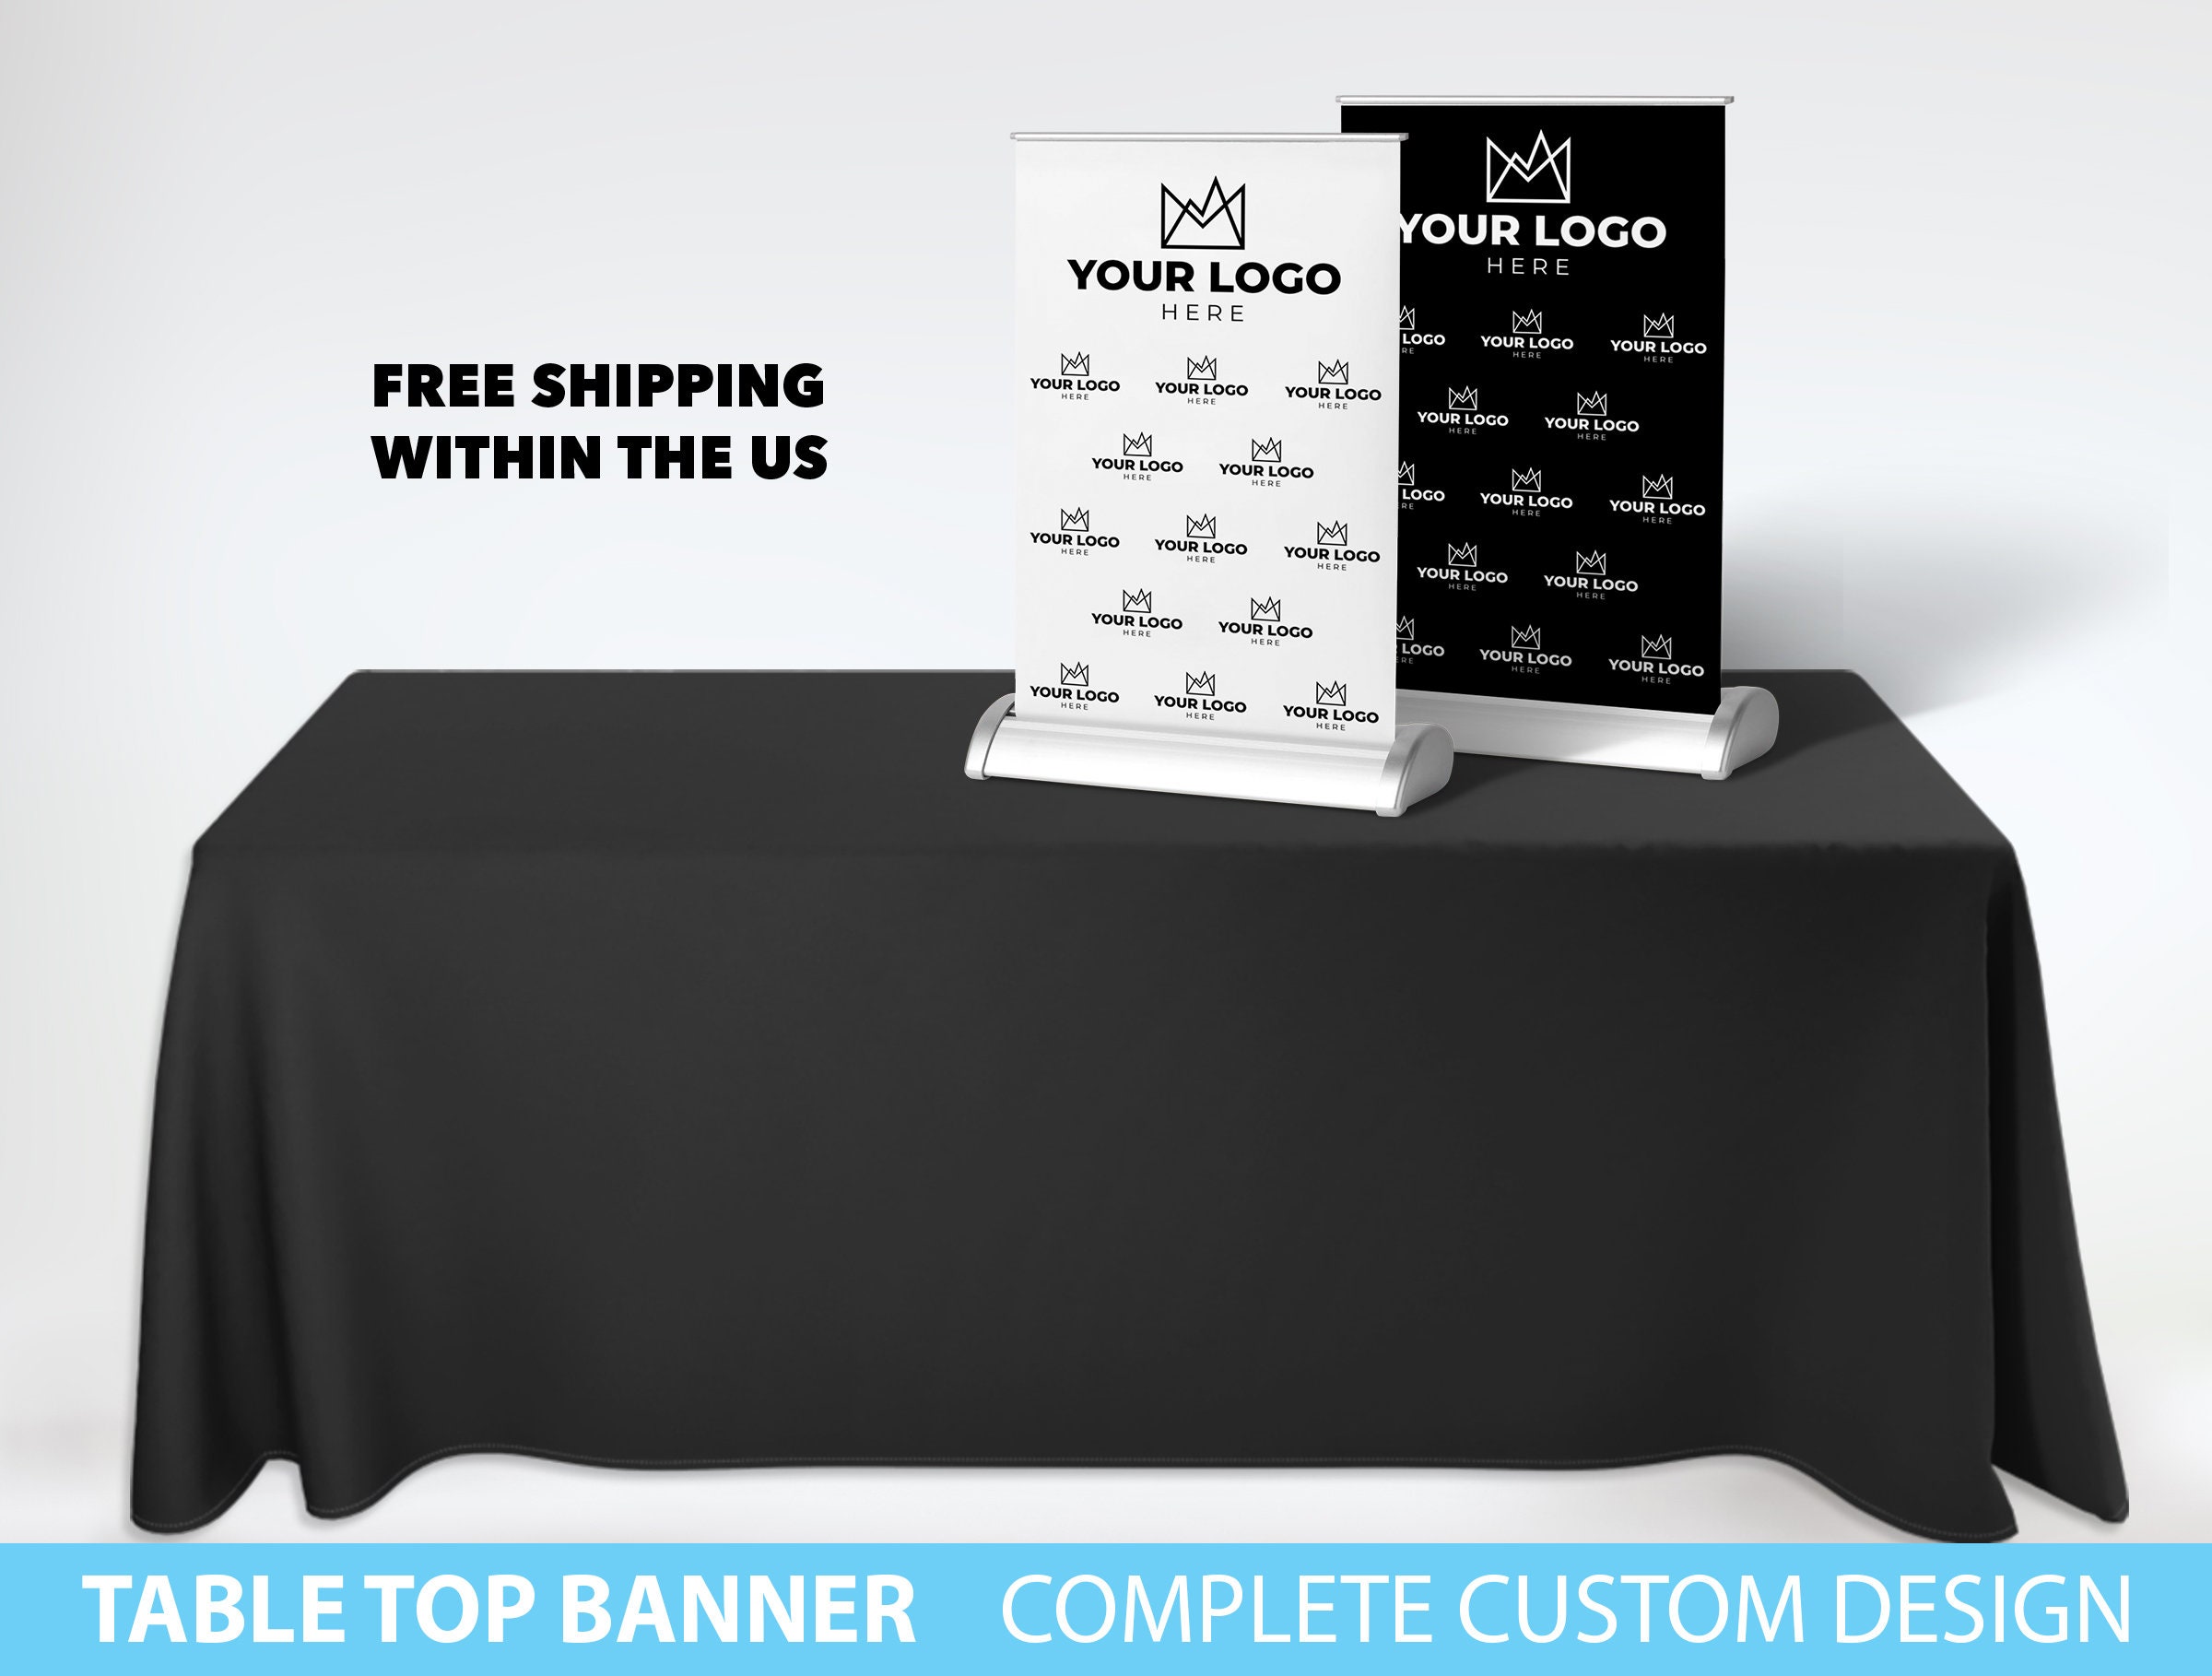 Table Top Custom Printed Table Top Banner Stand - Etsy